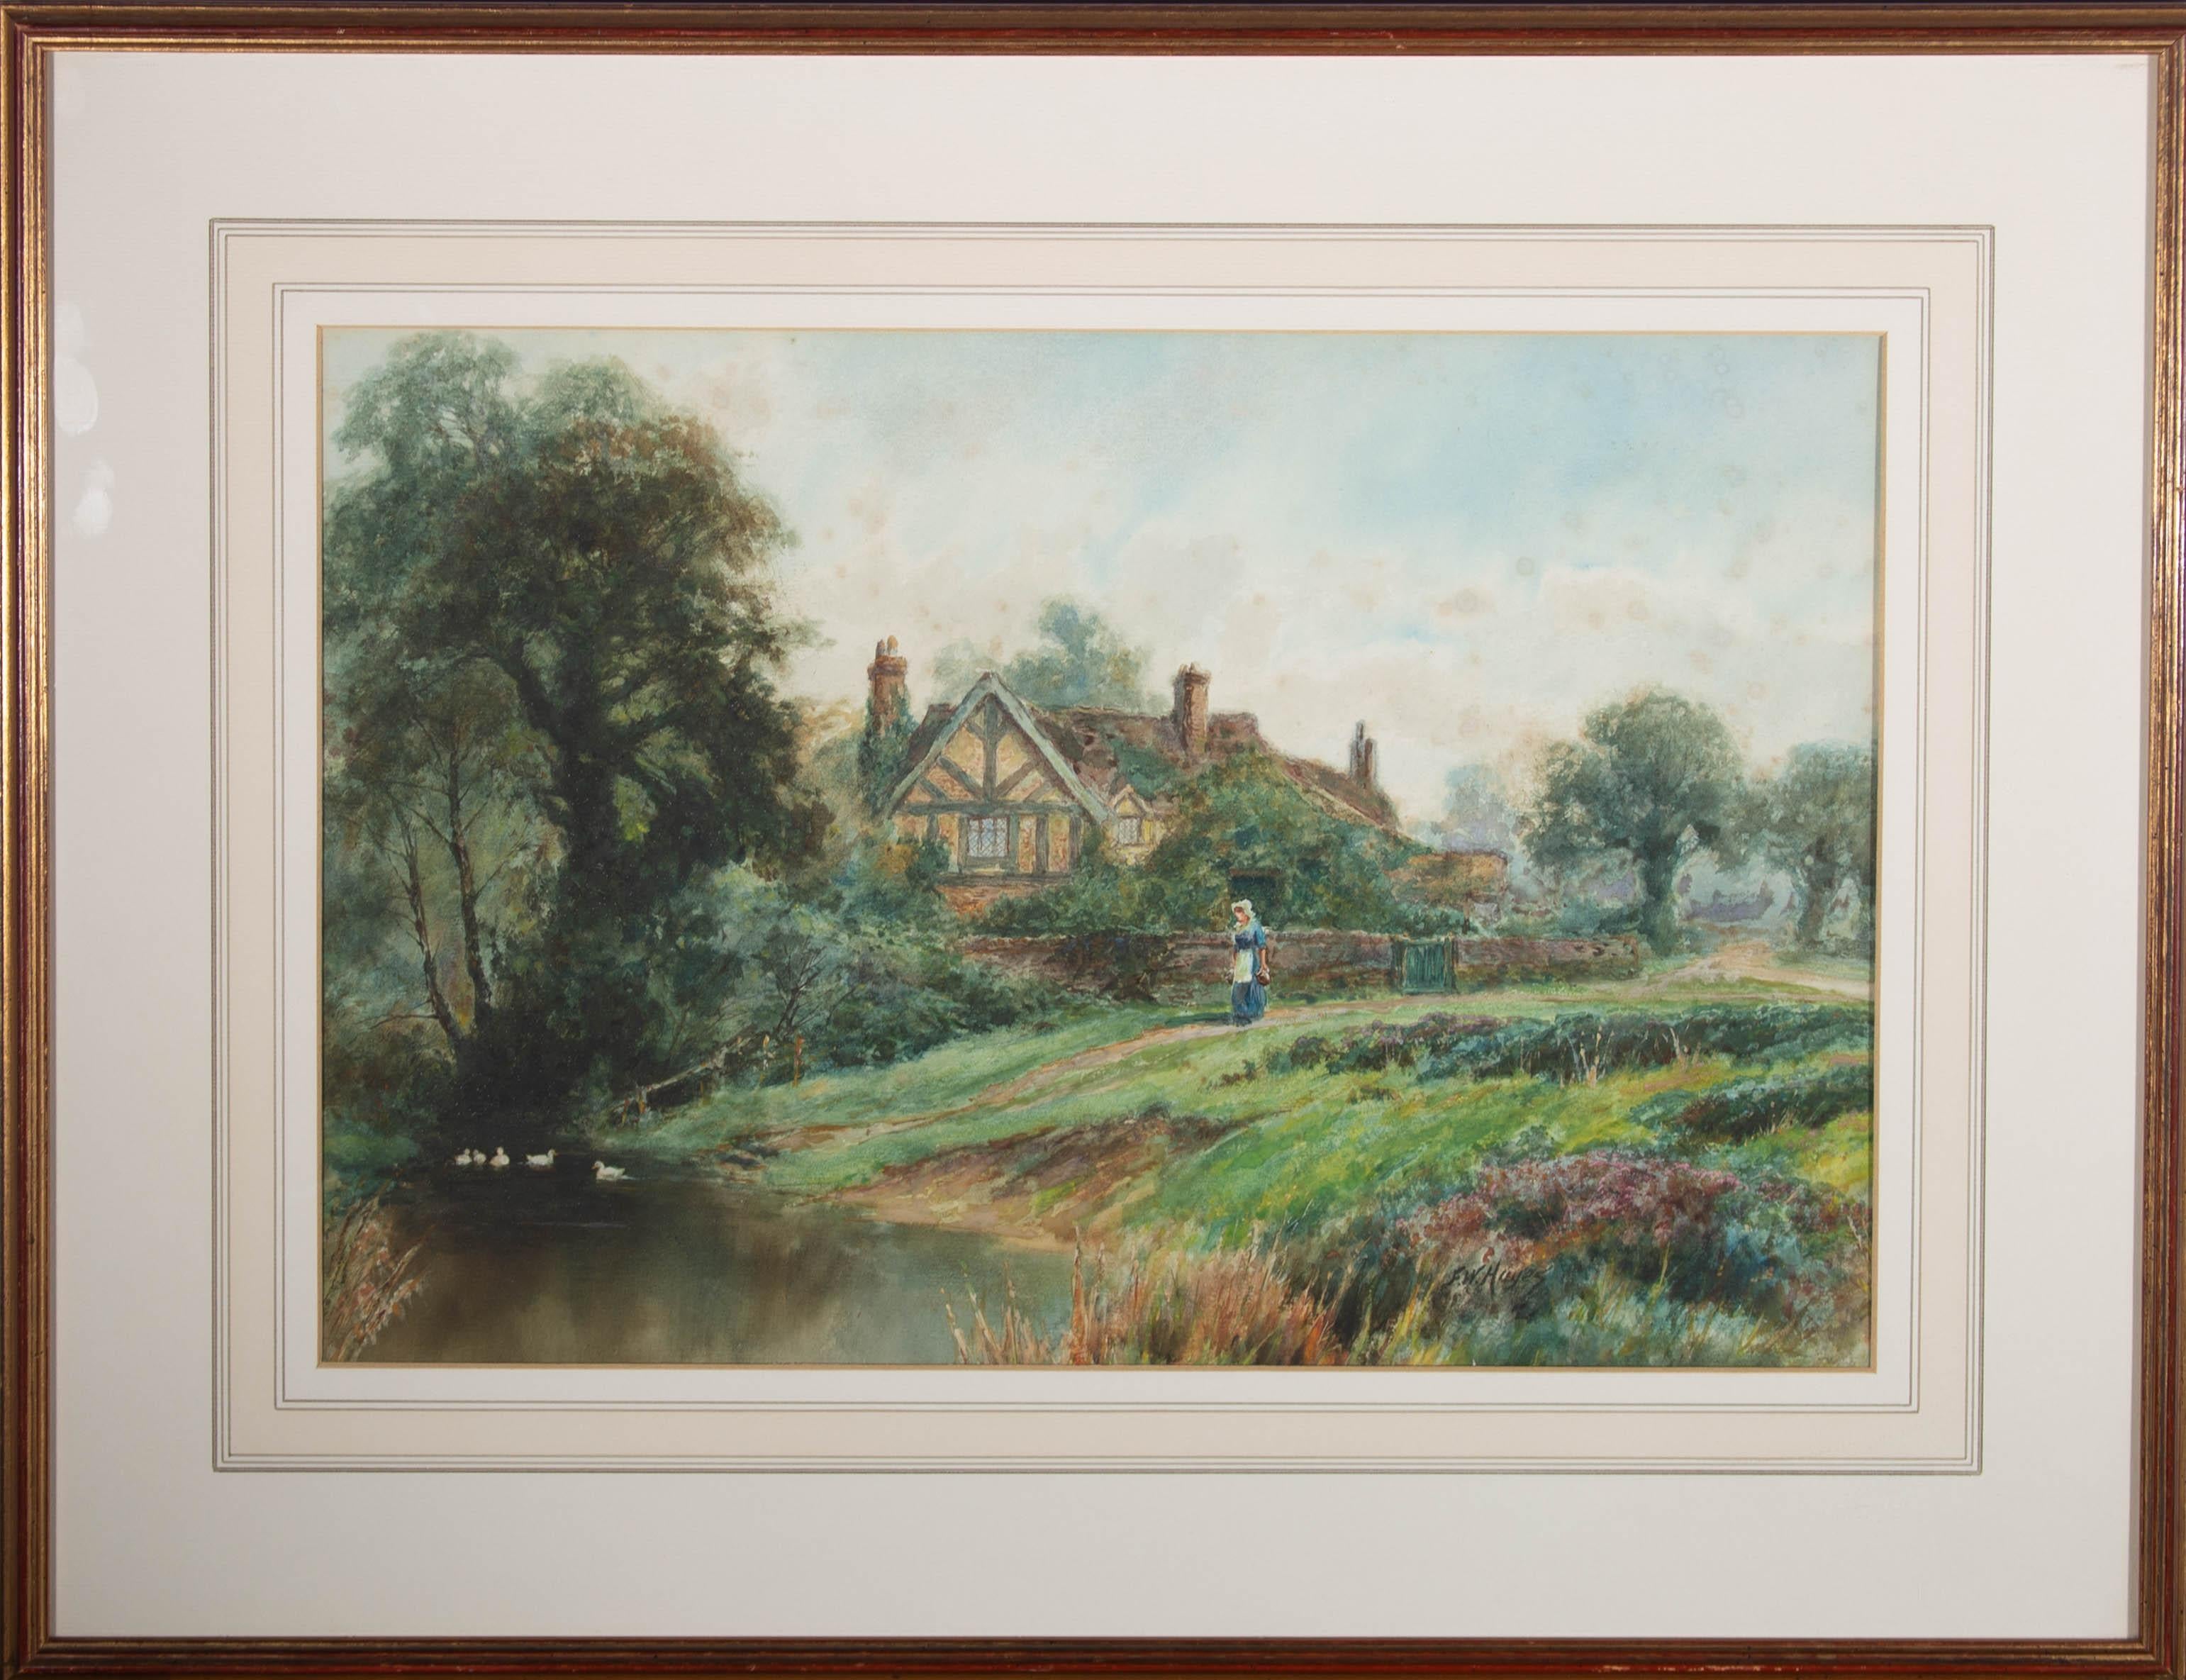 This delightful country scene depicts a woman walking down to a river where ducks paddle in the calm water. In the distance a cottage sits amongst the greenery of a country garden. Painted in fine detail, the artist has captured the tranquil